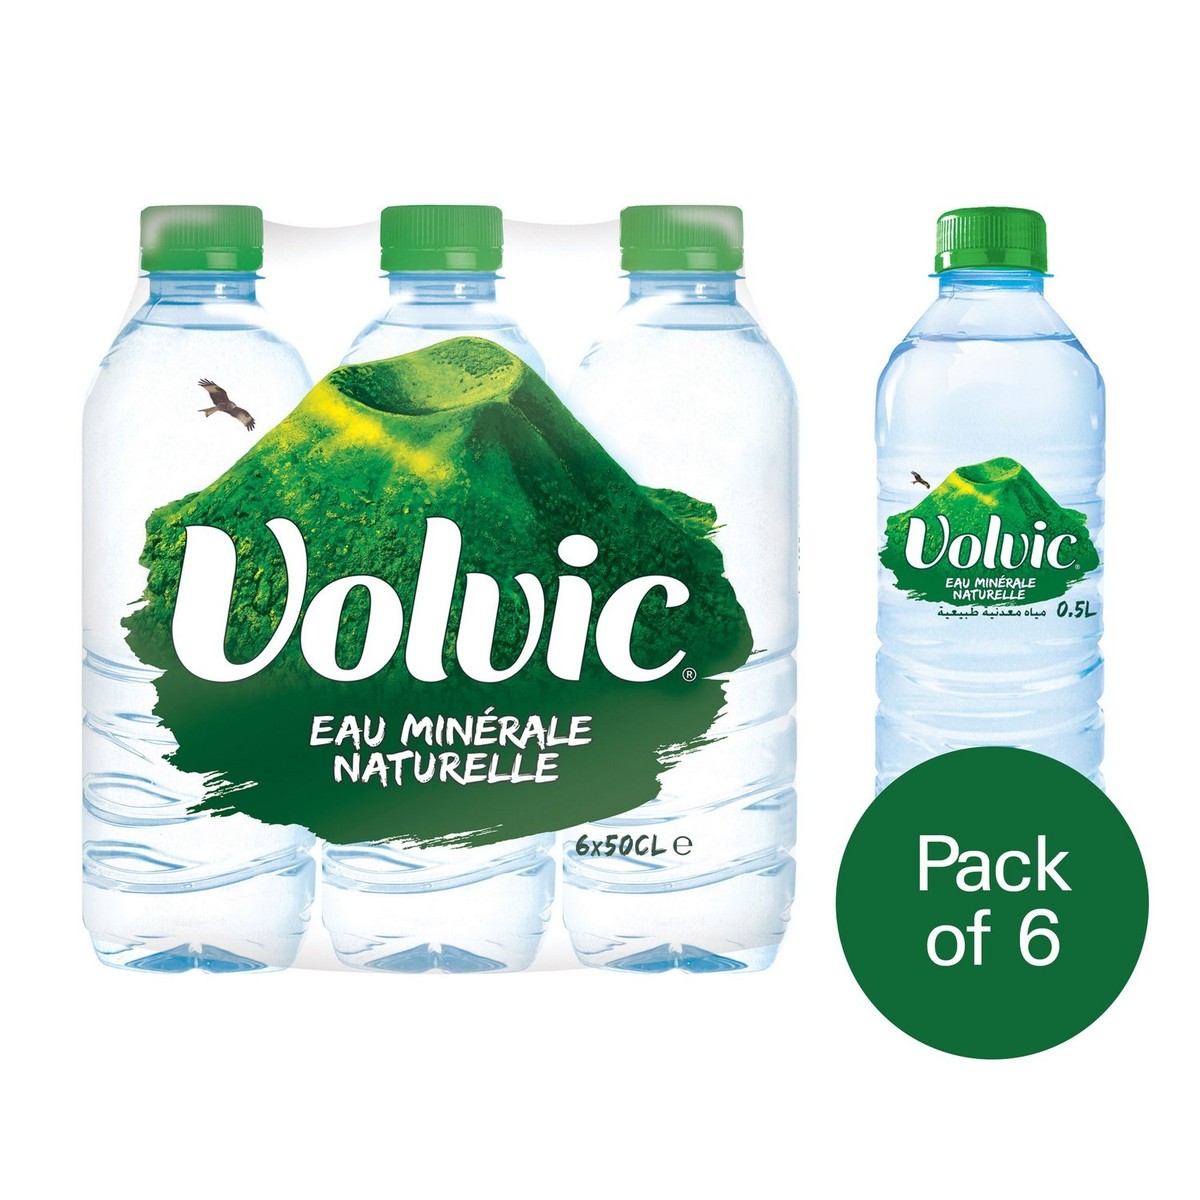 Volvic Natural Mineral Water 500ml is halal suitable